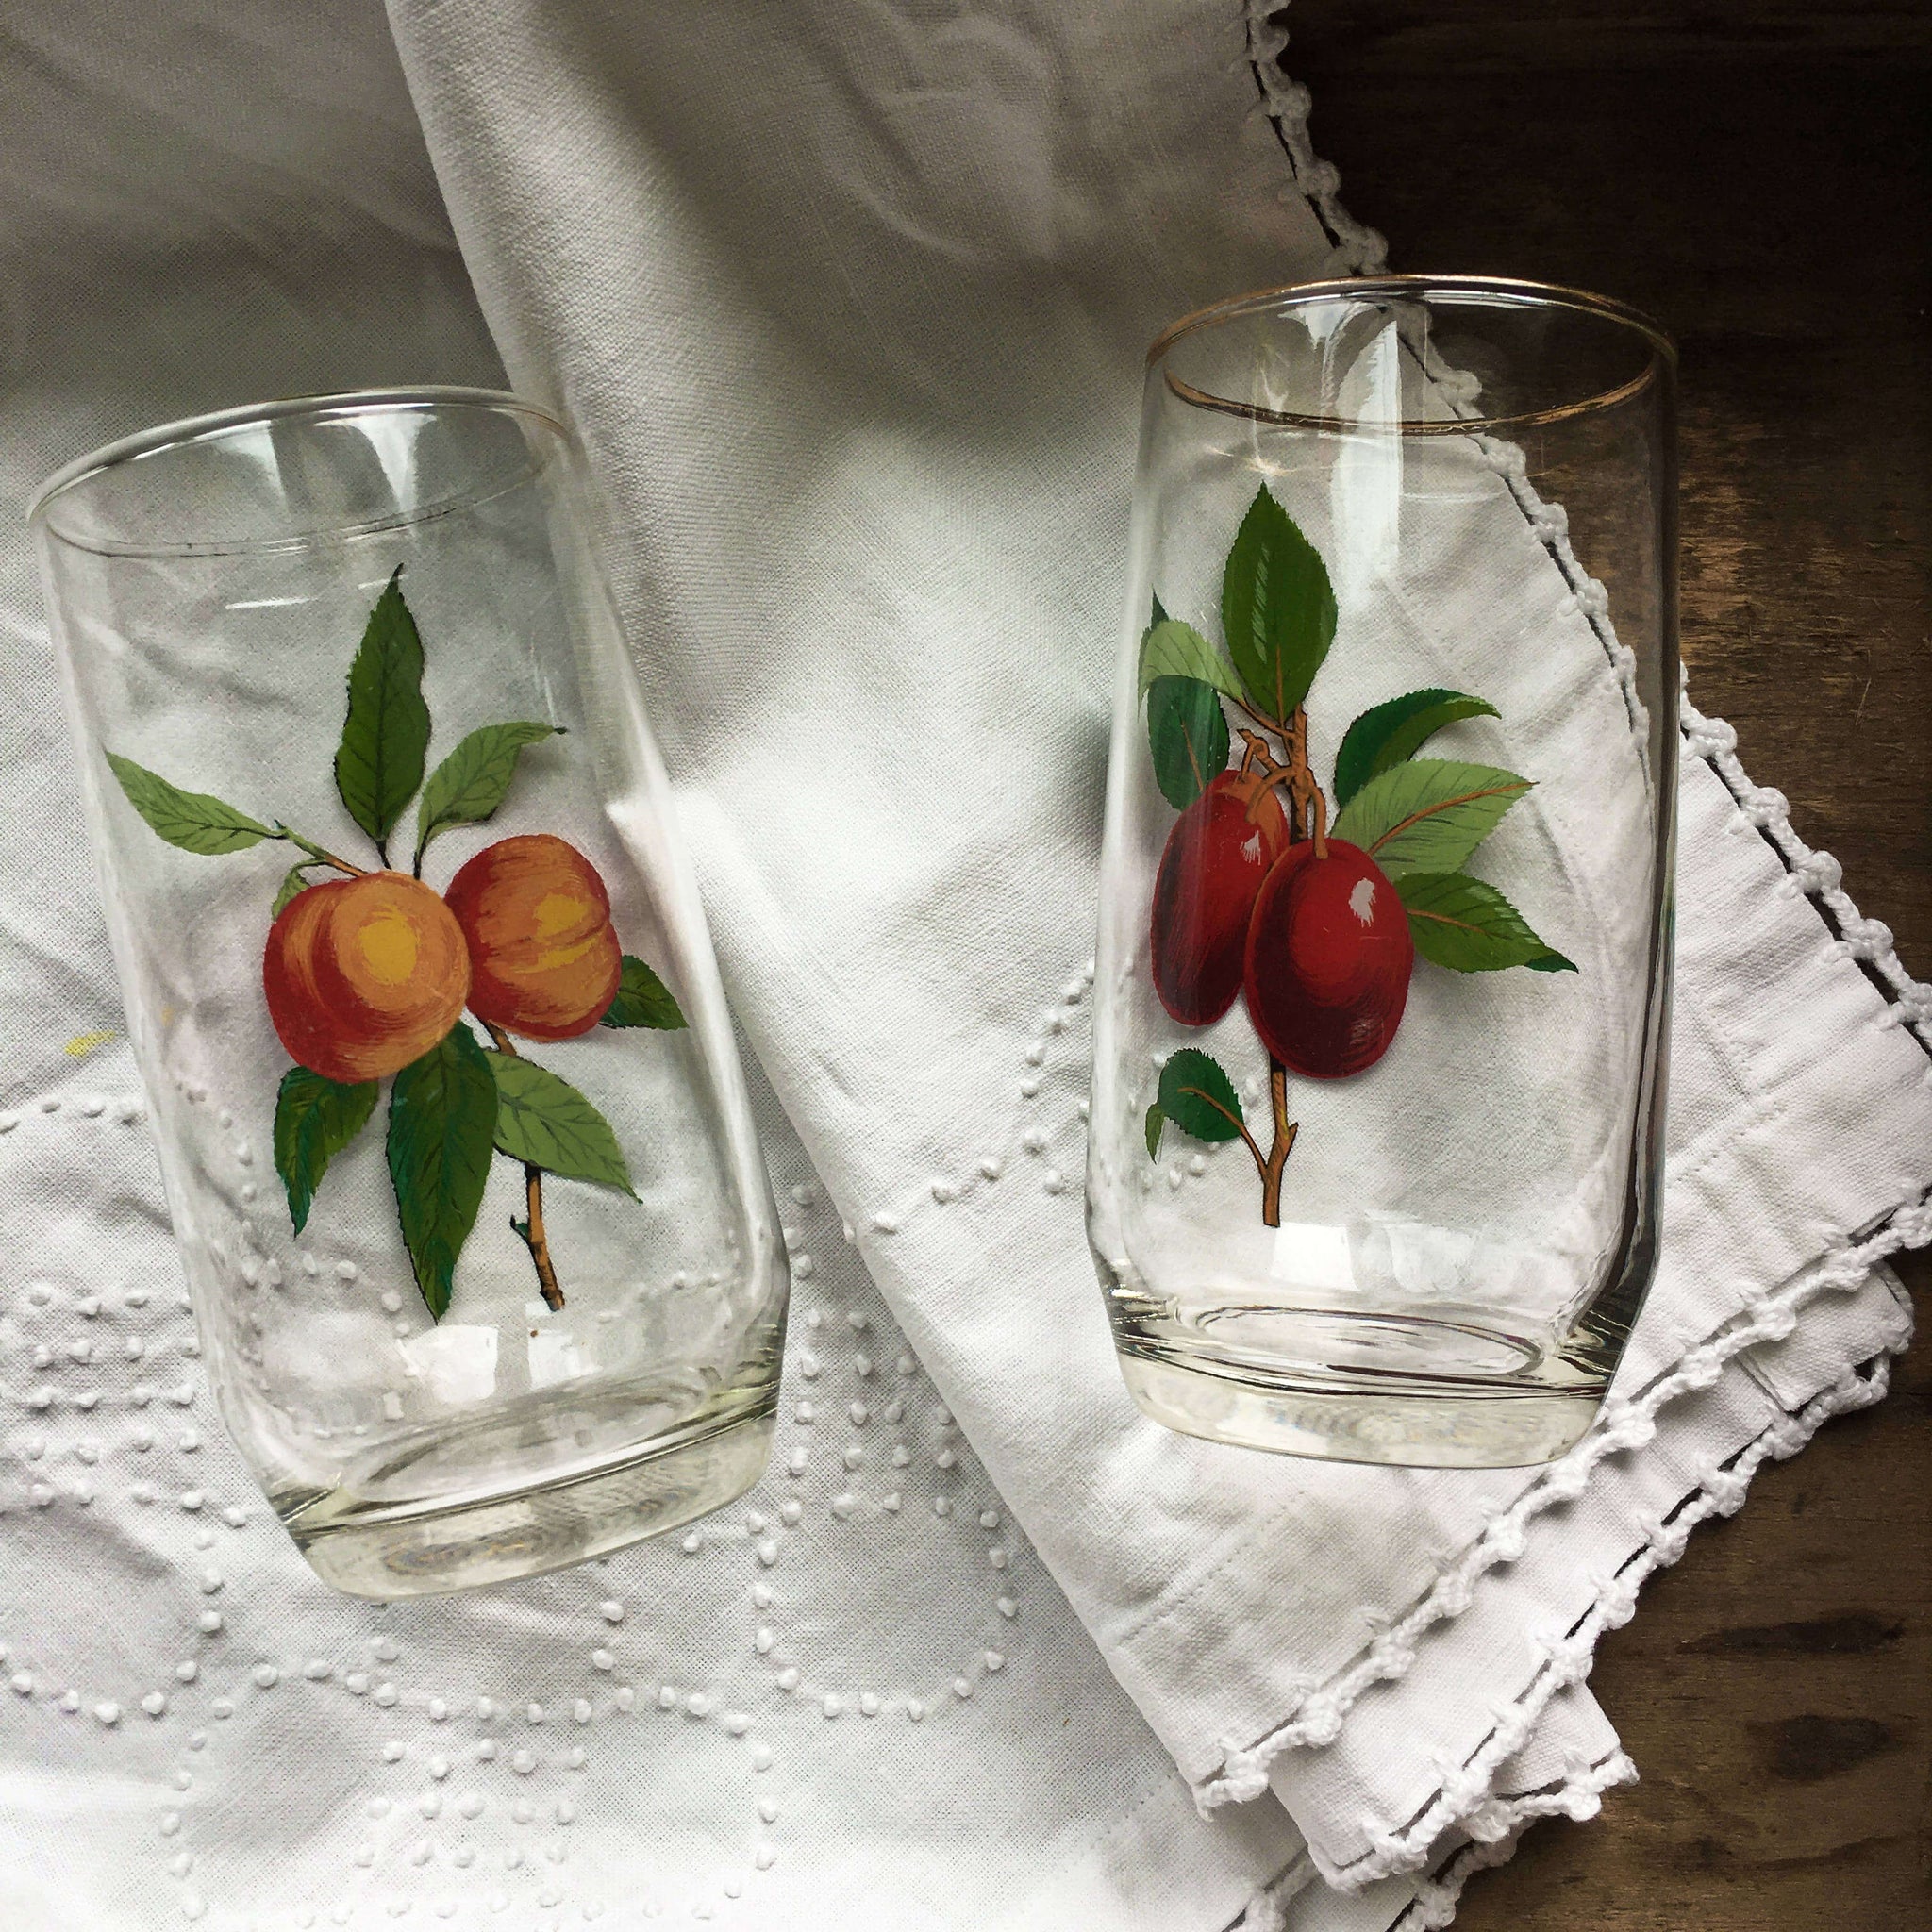 Vintage  Peach and Plum Pattern Glassware - West Virginia Glass Specialty Co Fruit Tumblers -circa 1960s 1970s